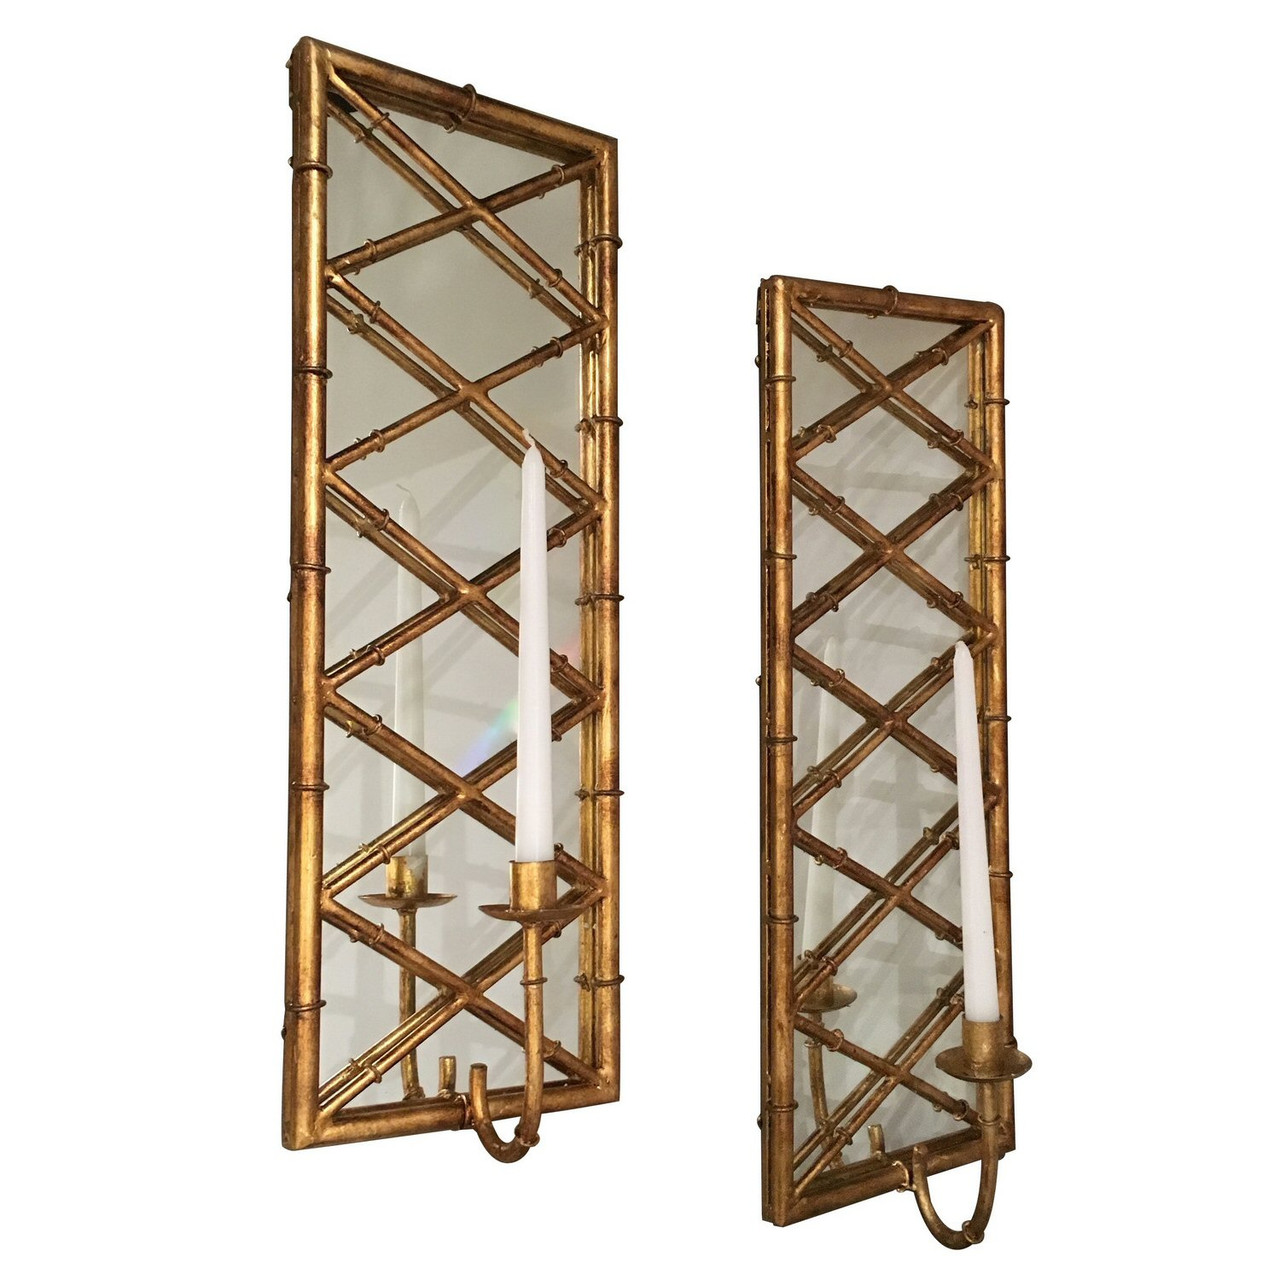 Antique Gold Wall Sconce